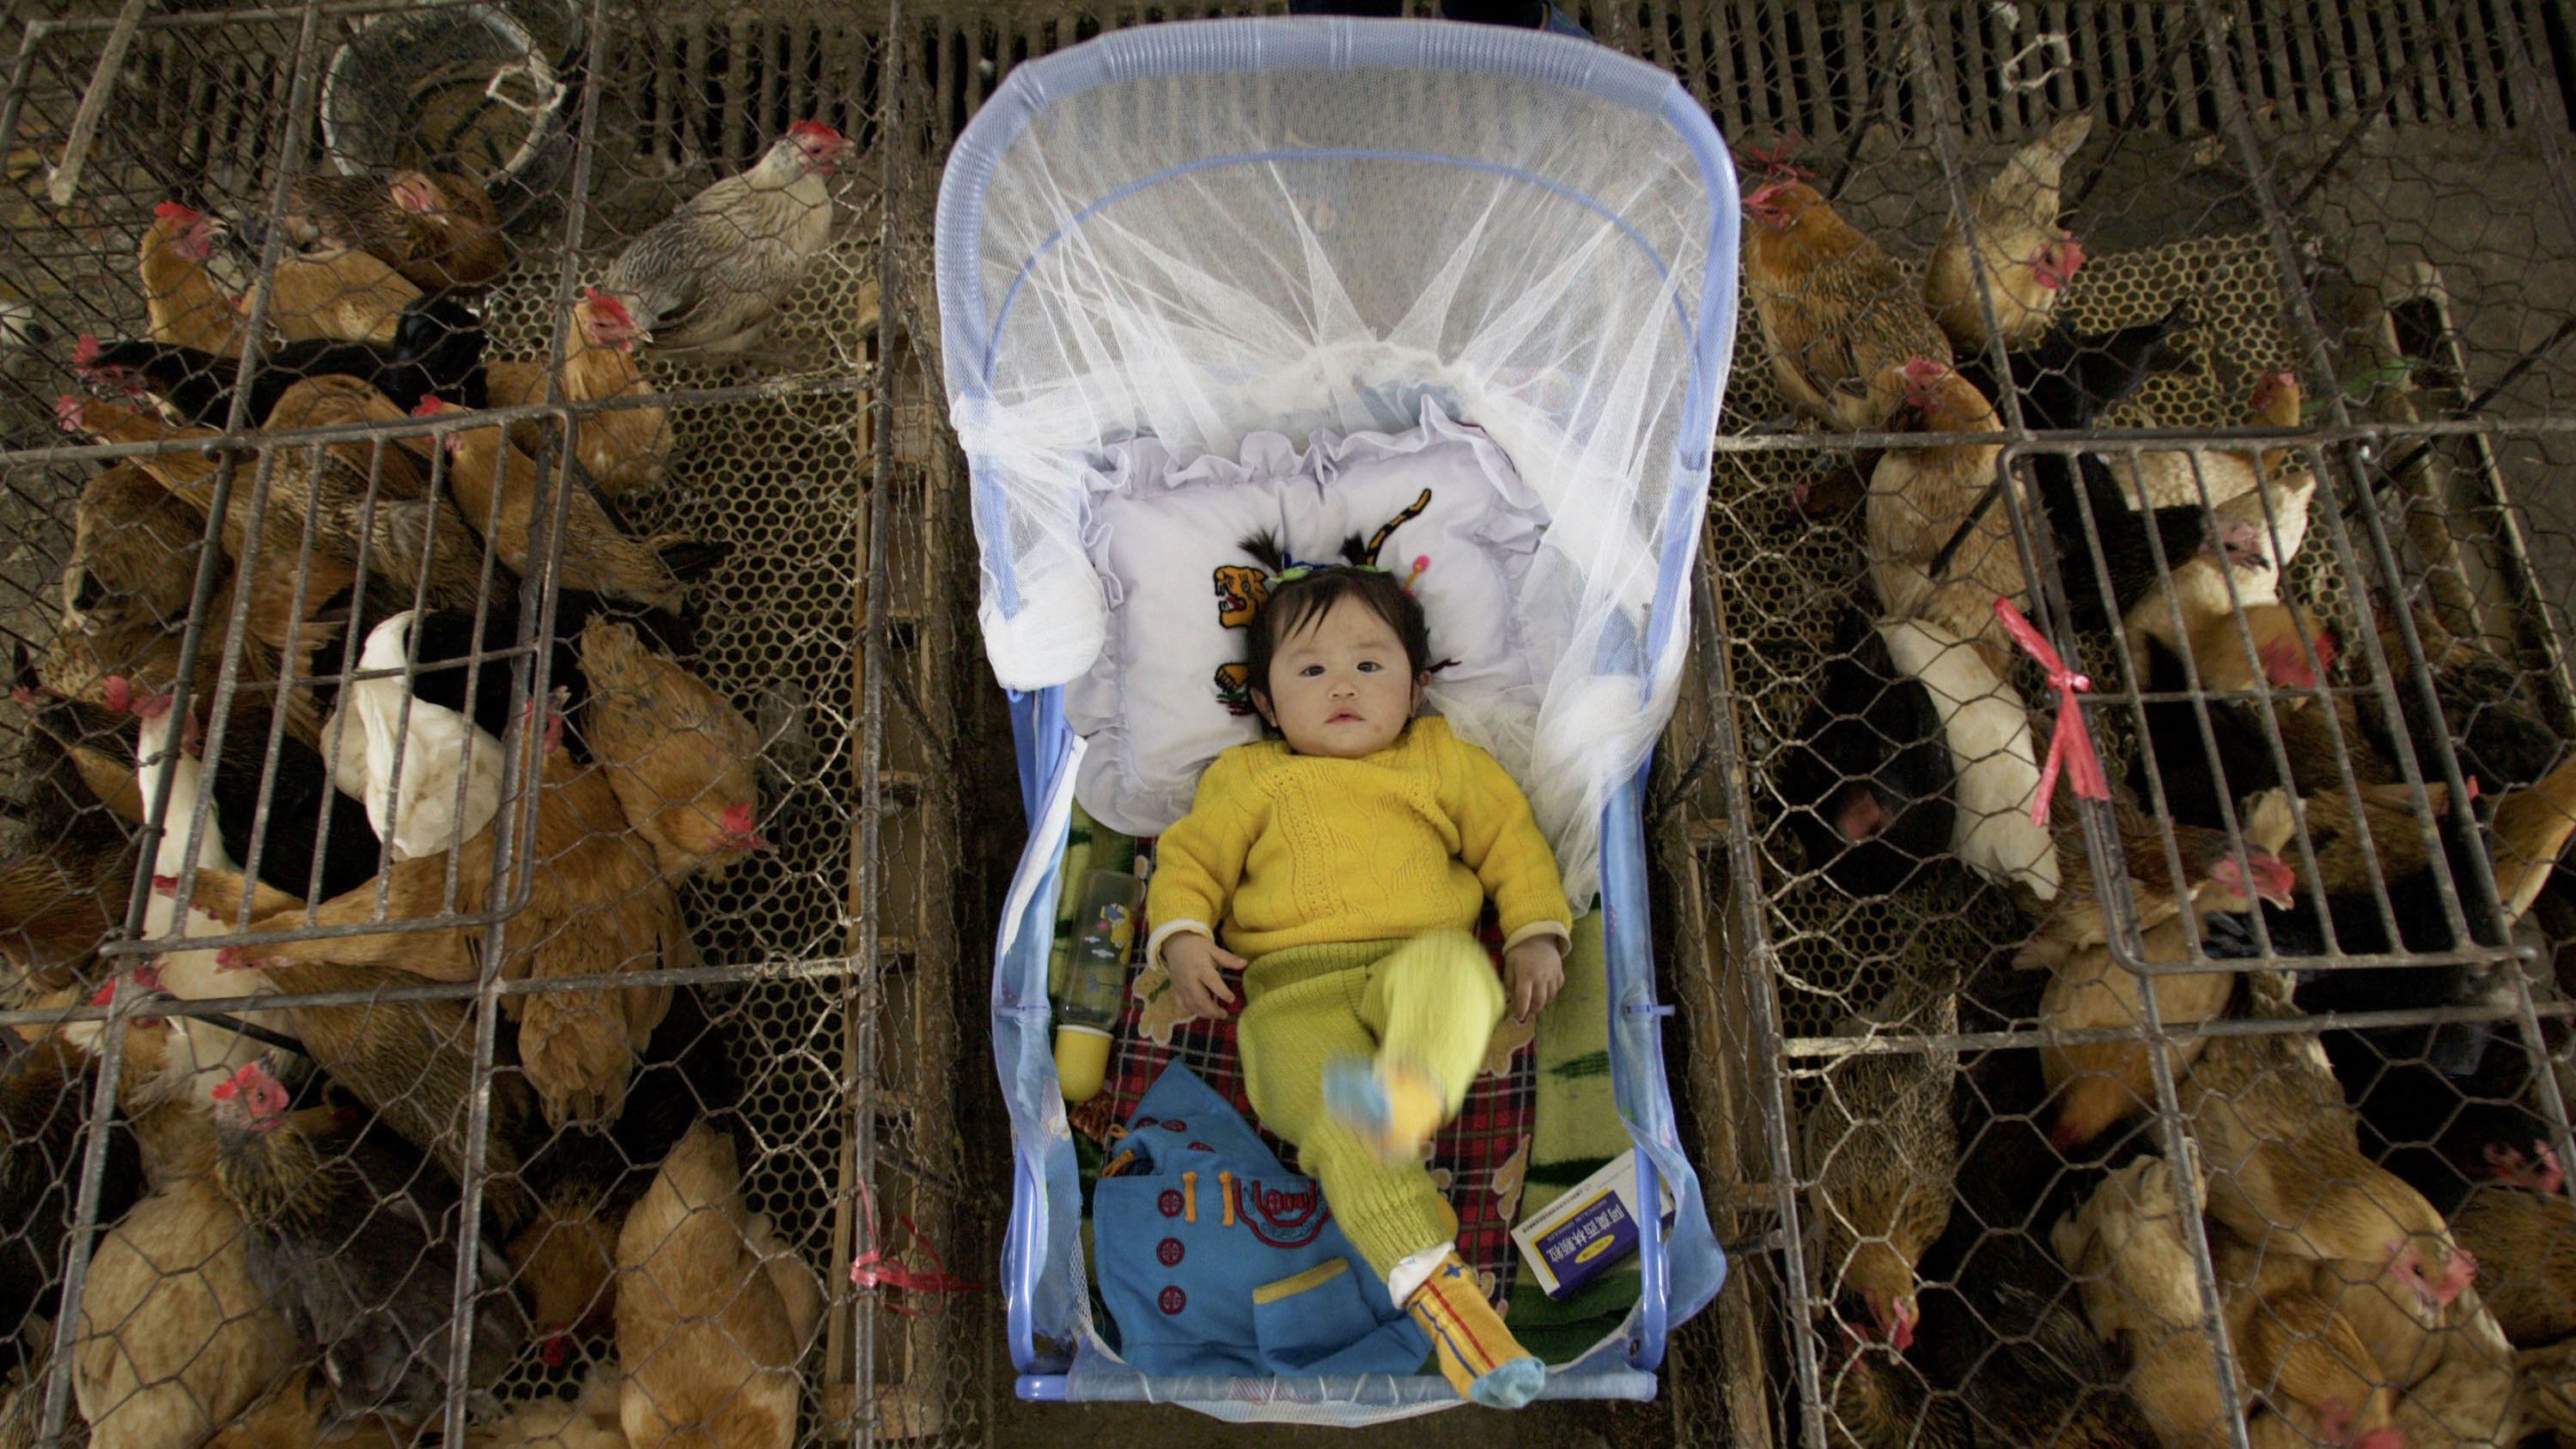 A vendor's child is placed between poultry cages in Wuhan, China, in this file picture.